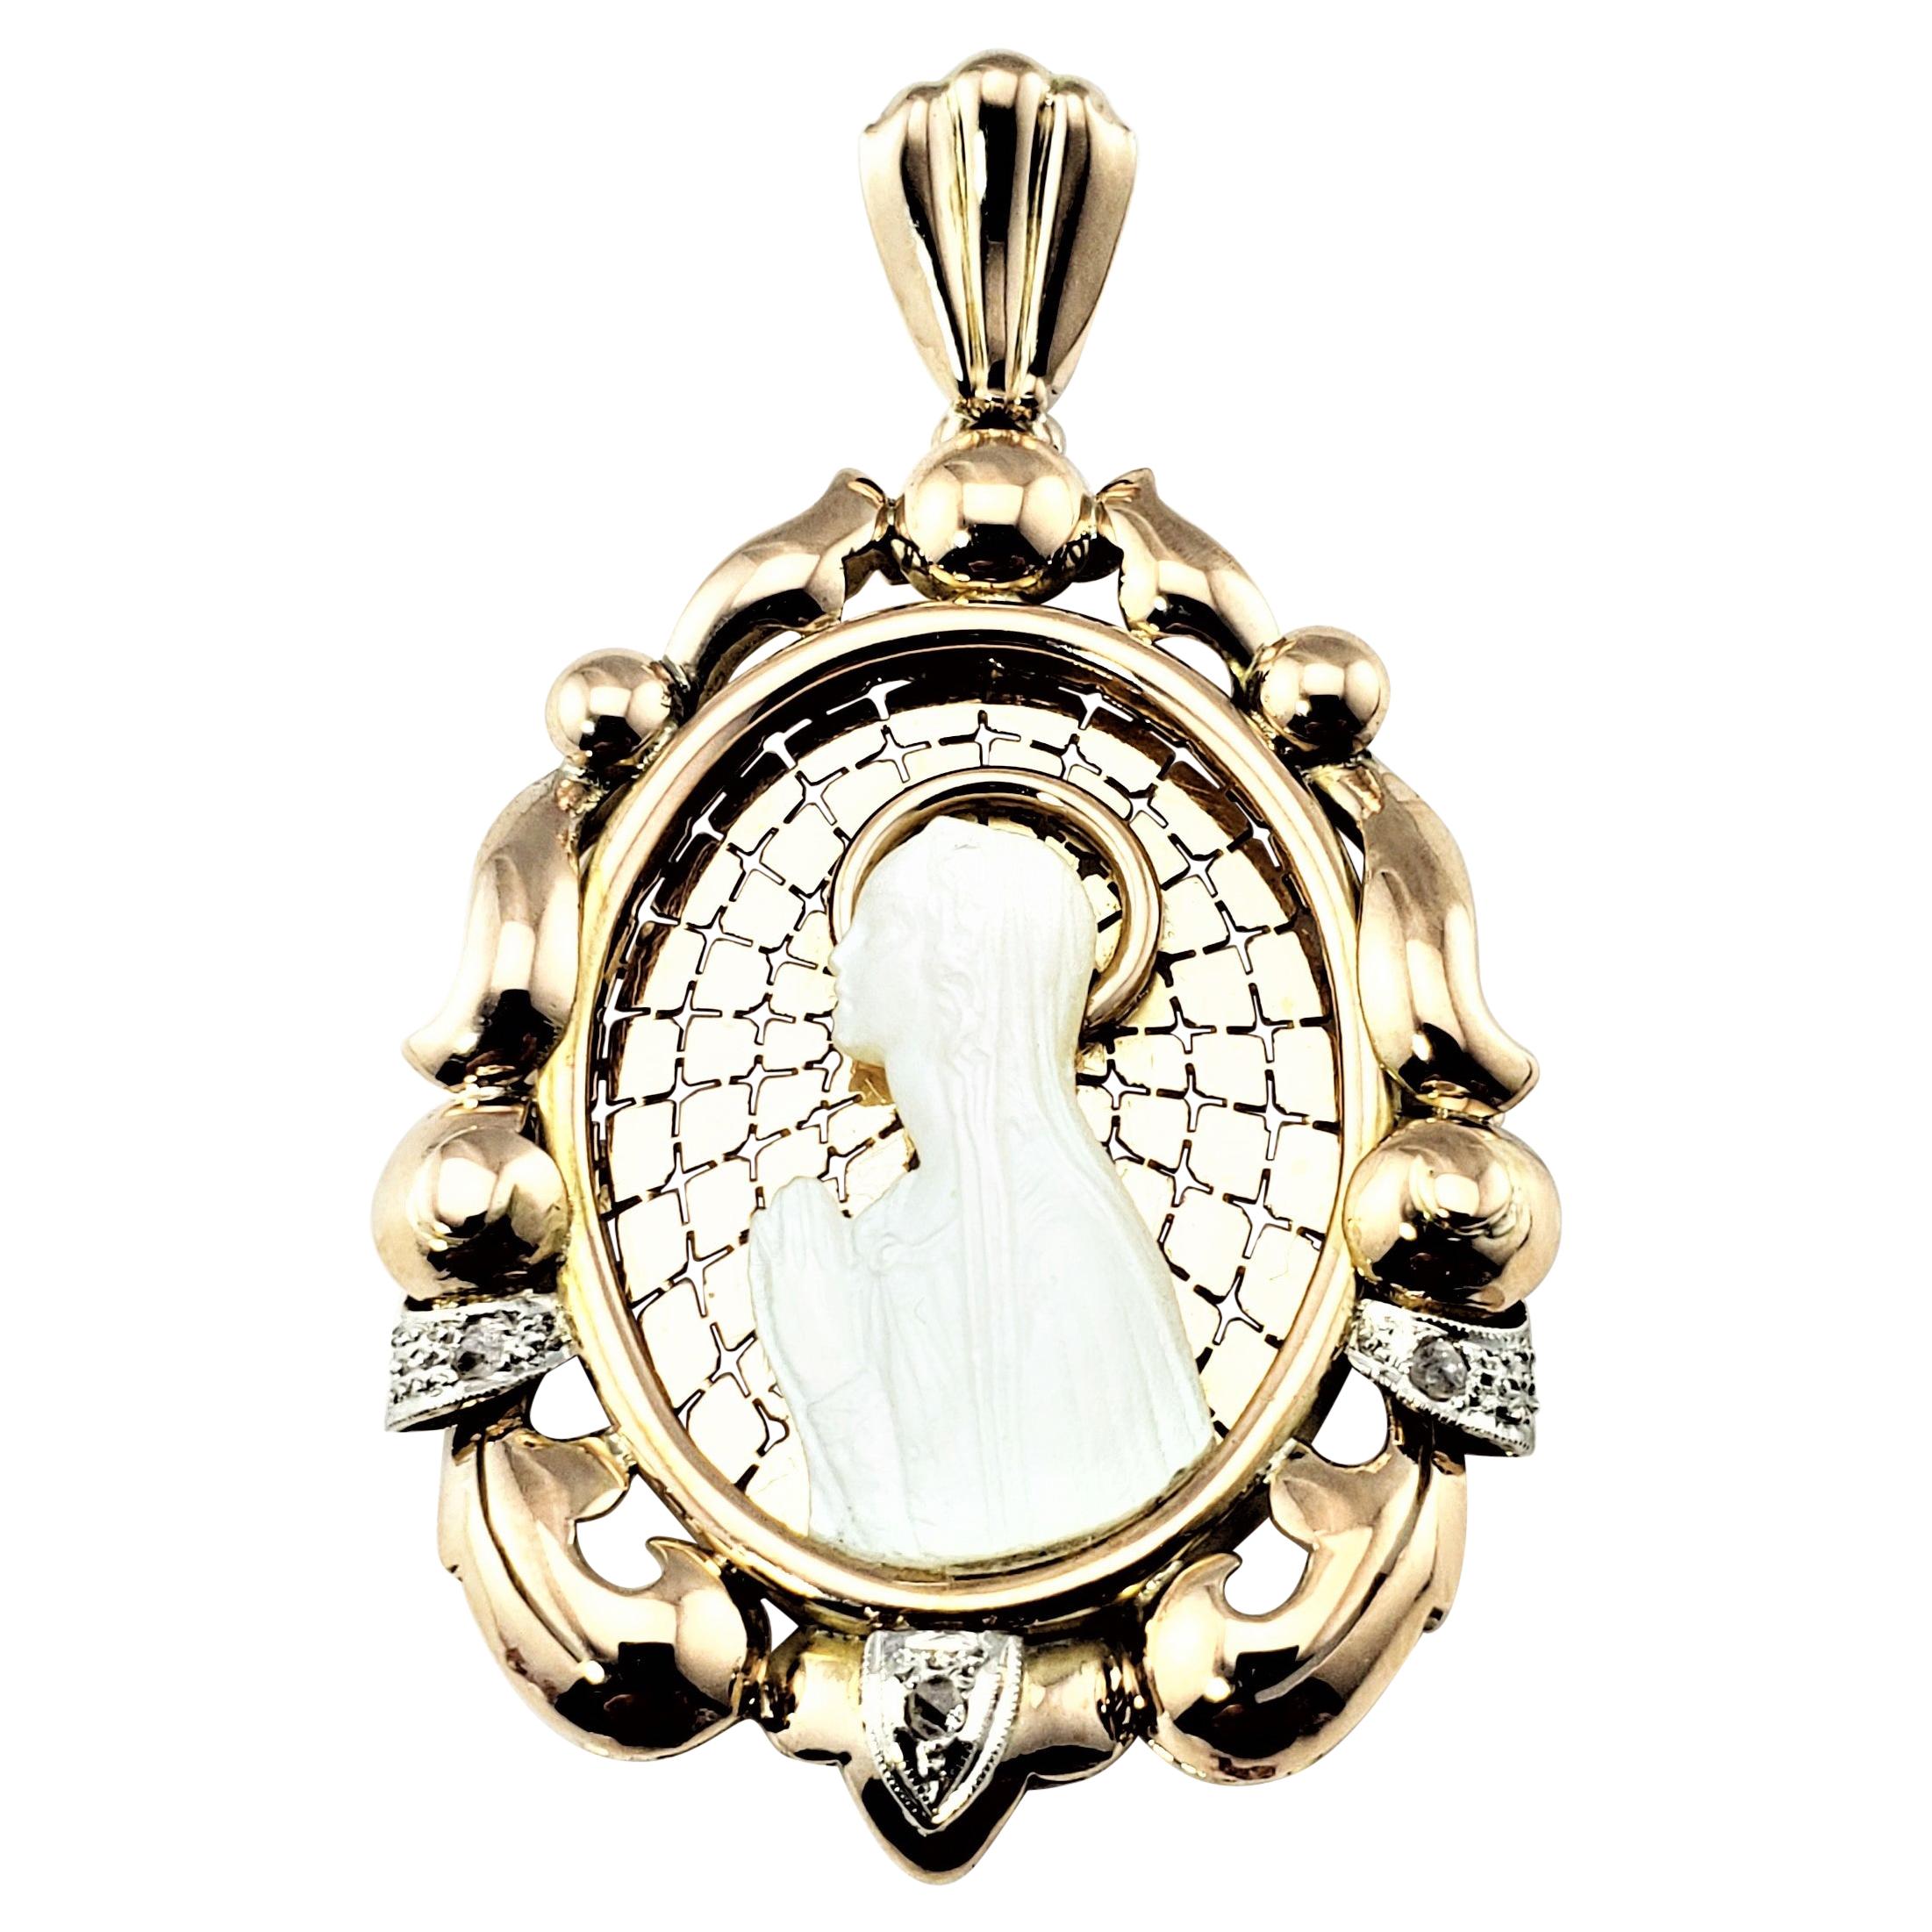 14 Karat Yellow Gold Mother of Pearl and Diamond Blessed Mother Pendant